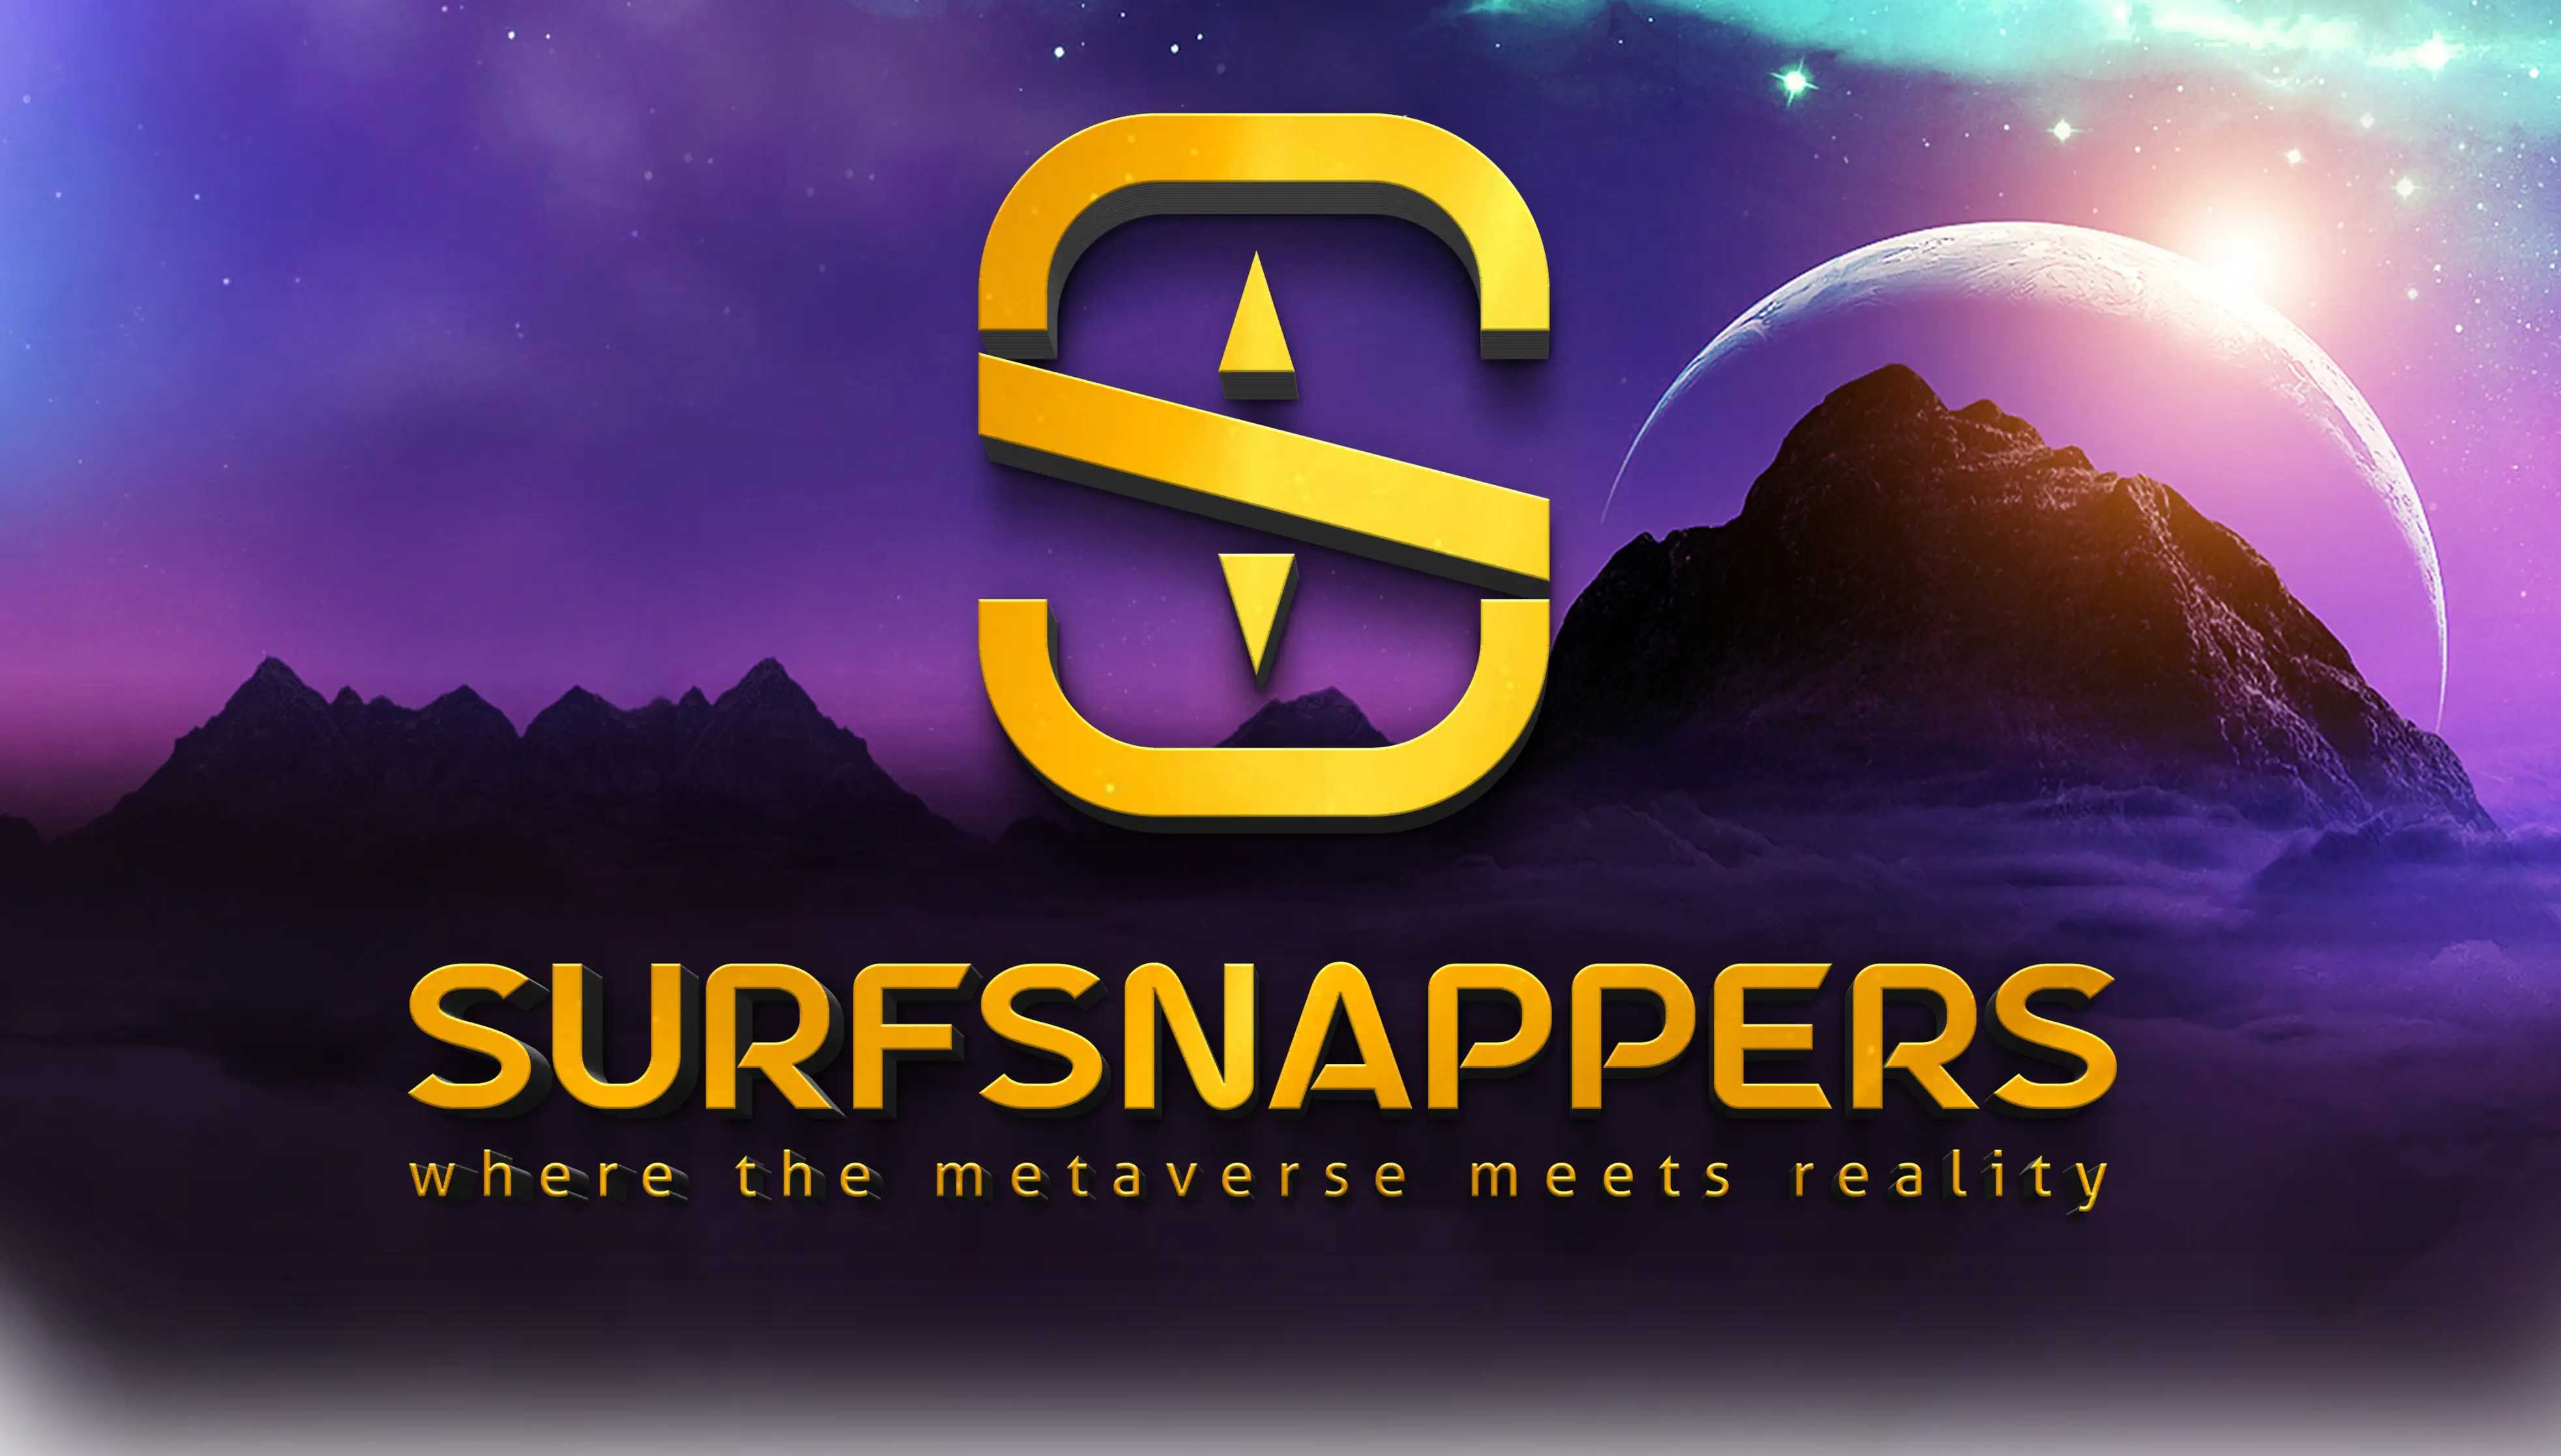 Surfsnappers, where the metaverse meets reality